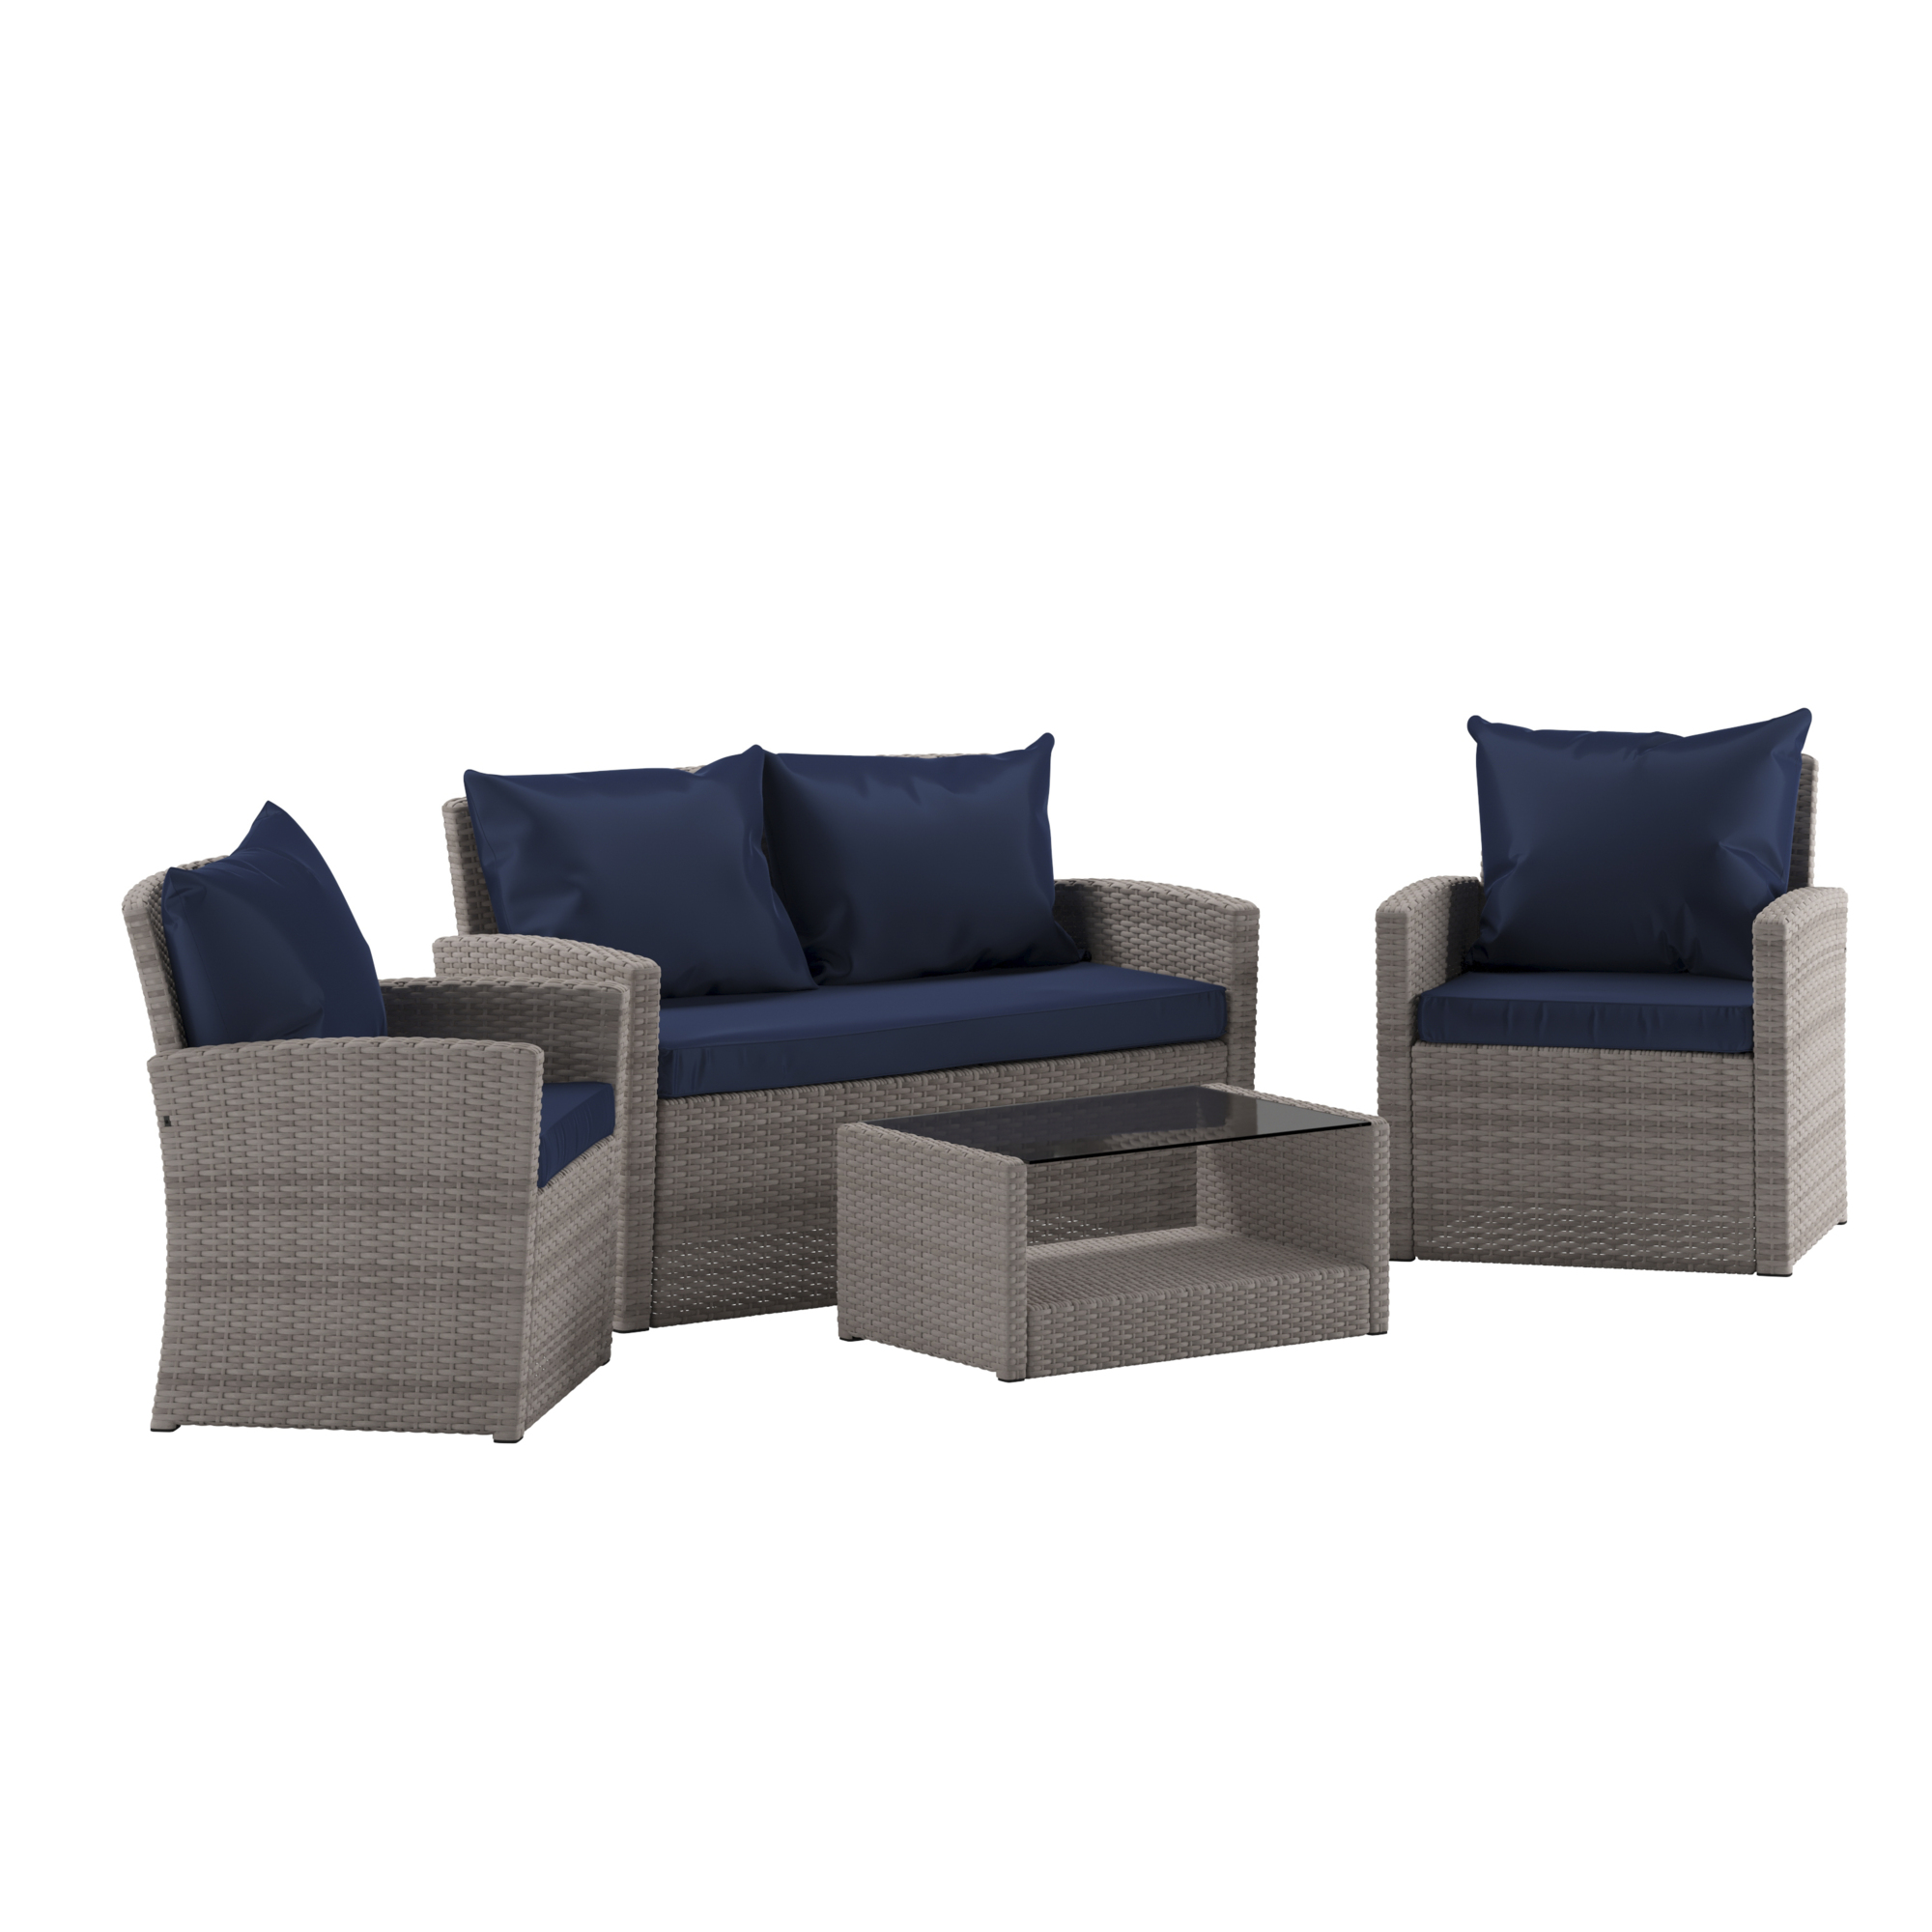 Flash Furniture, 4 Piece Lt Gray Patio Set with Navy Back Pillows, Pieces (qty.) 4 Primary Color Gray, Seating Capacity 4 Model JJS351GYNV